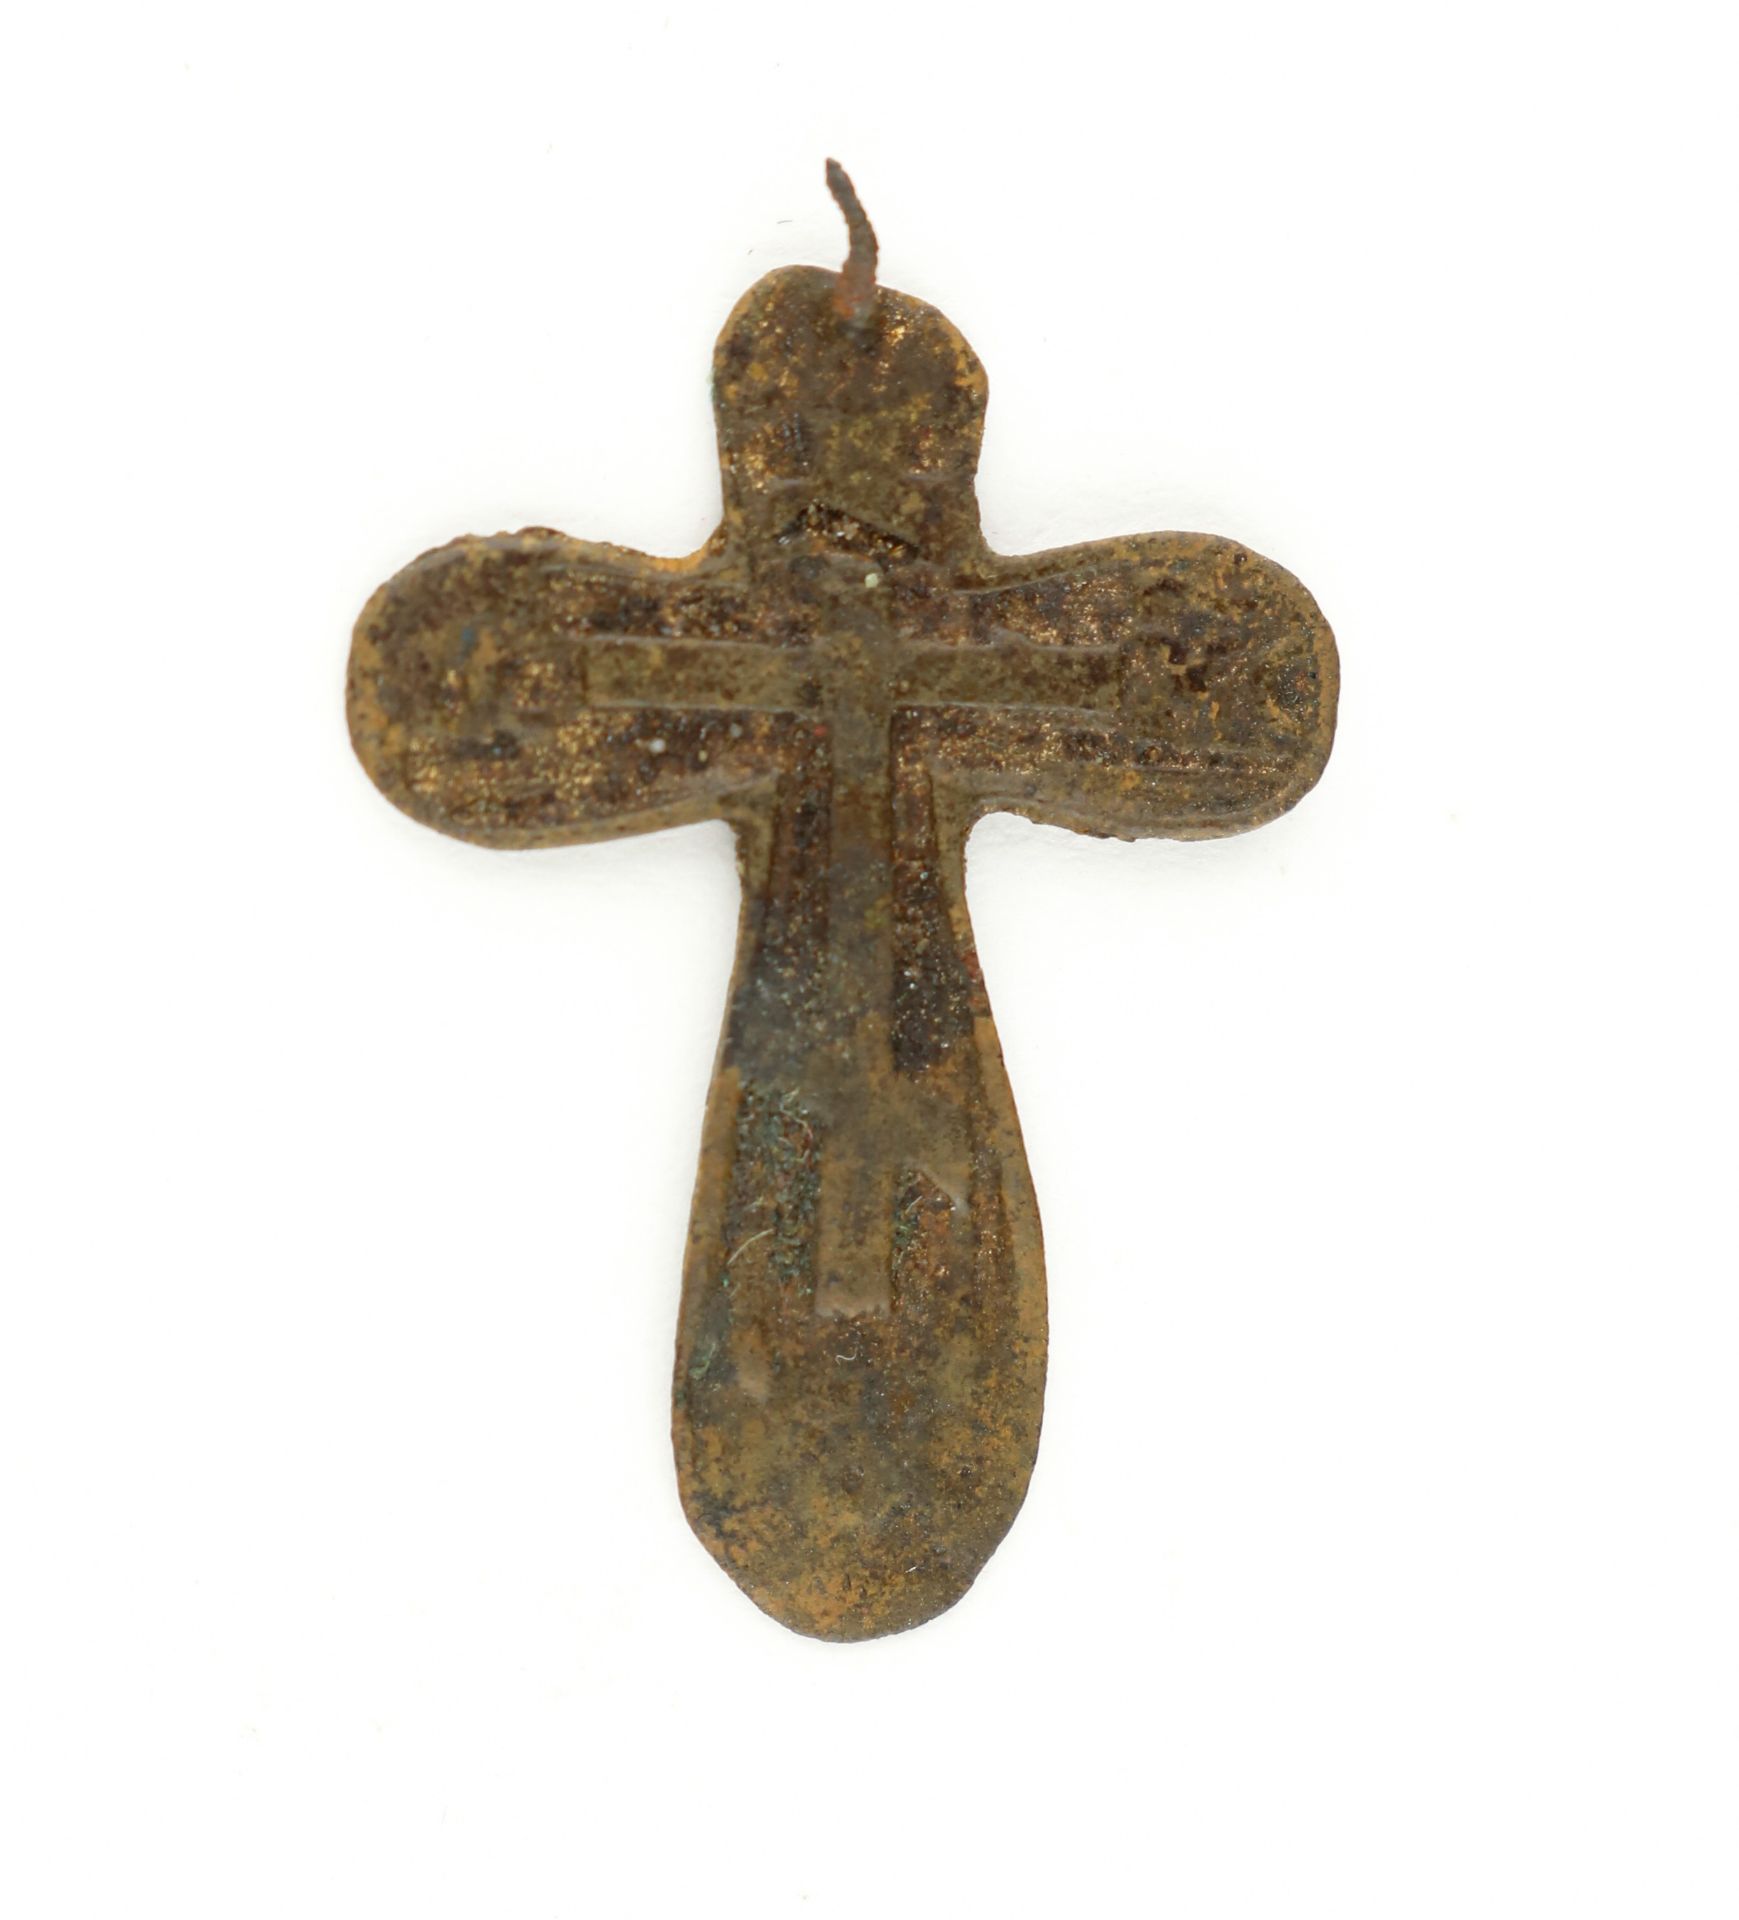 SOLDIER'S CROSS FROM GETTYSBURG CAMP LETTERMAN